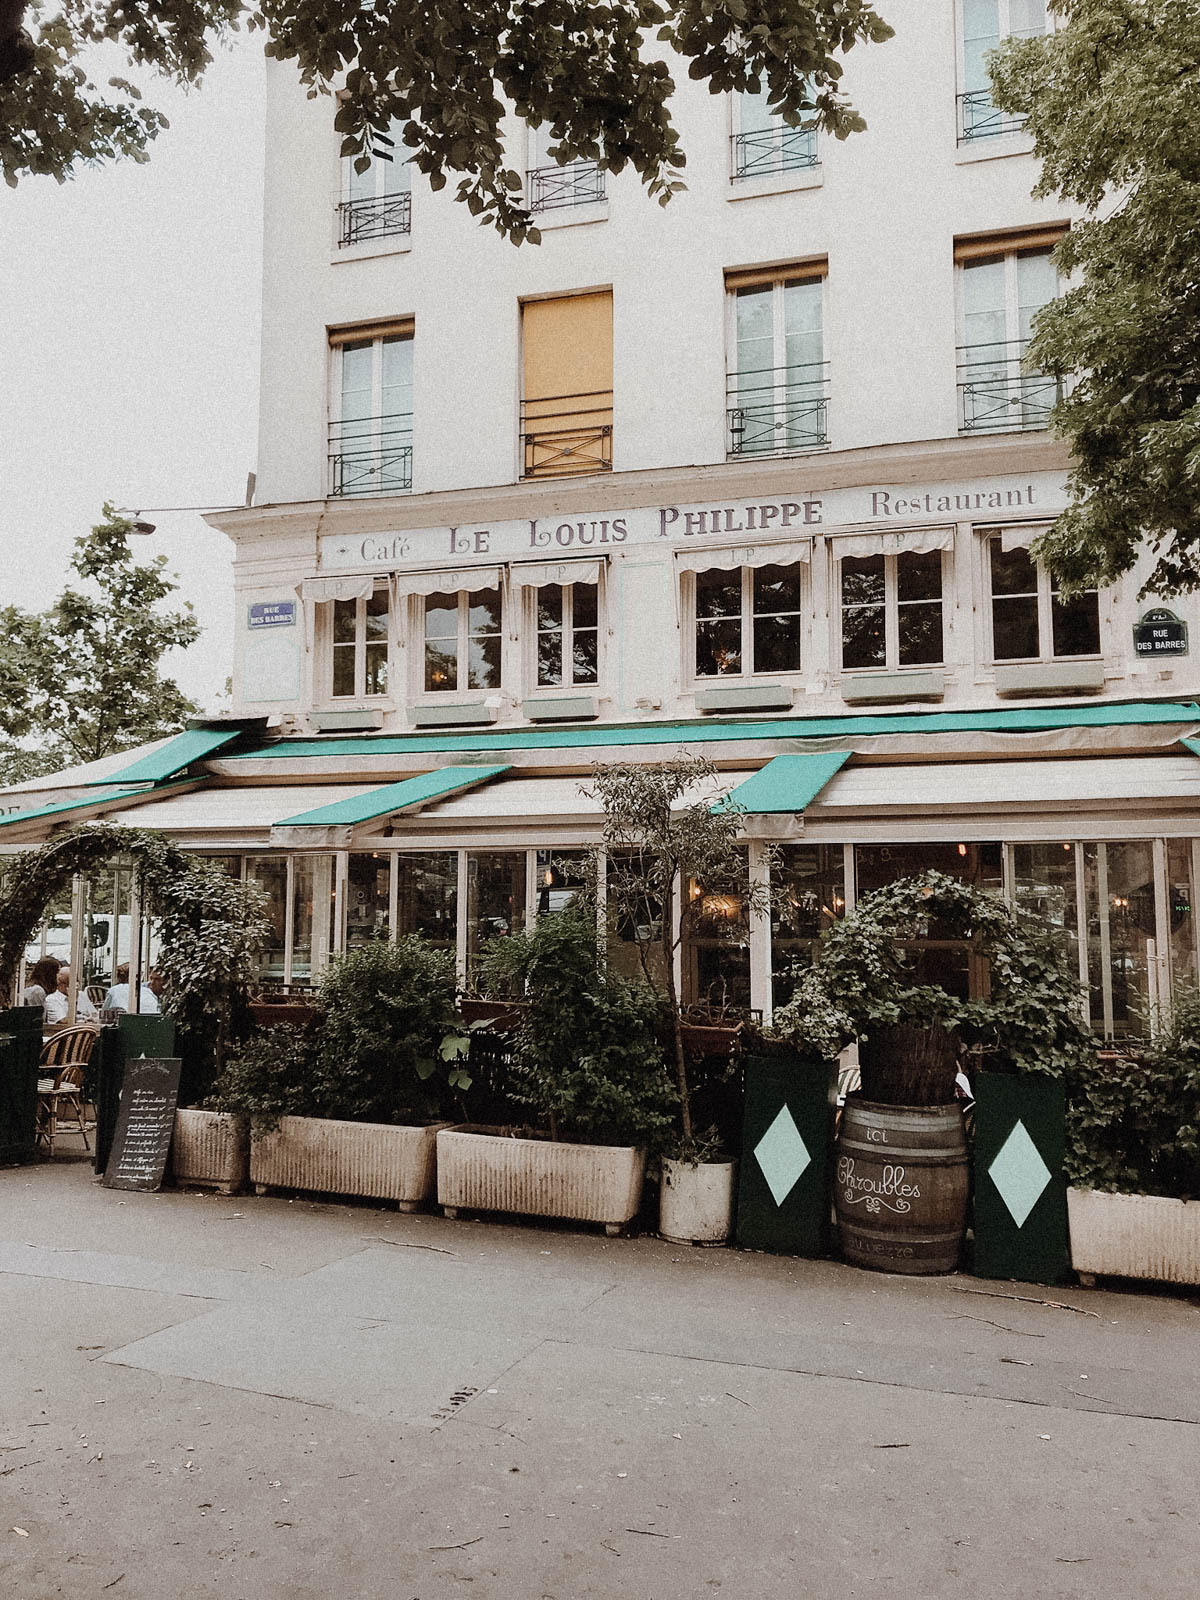 Paris France Travel Guide - Cafe Le Louis Philippe, European Architecture and Buildings / RG Daily Blog